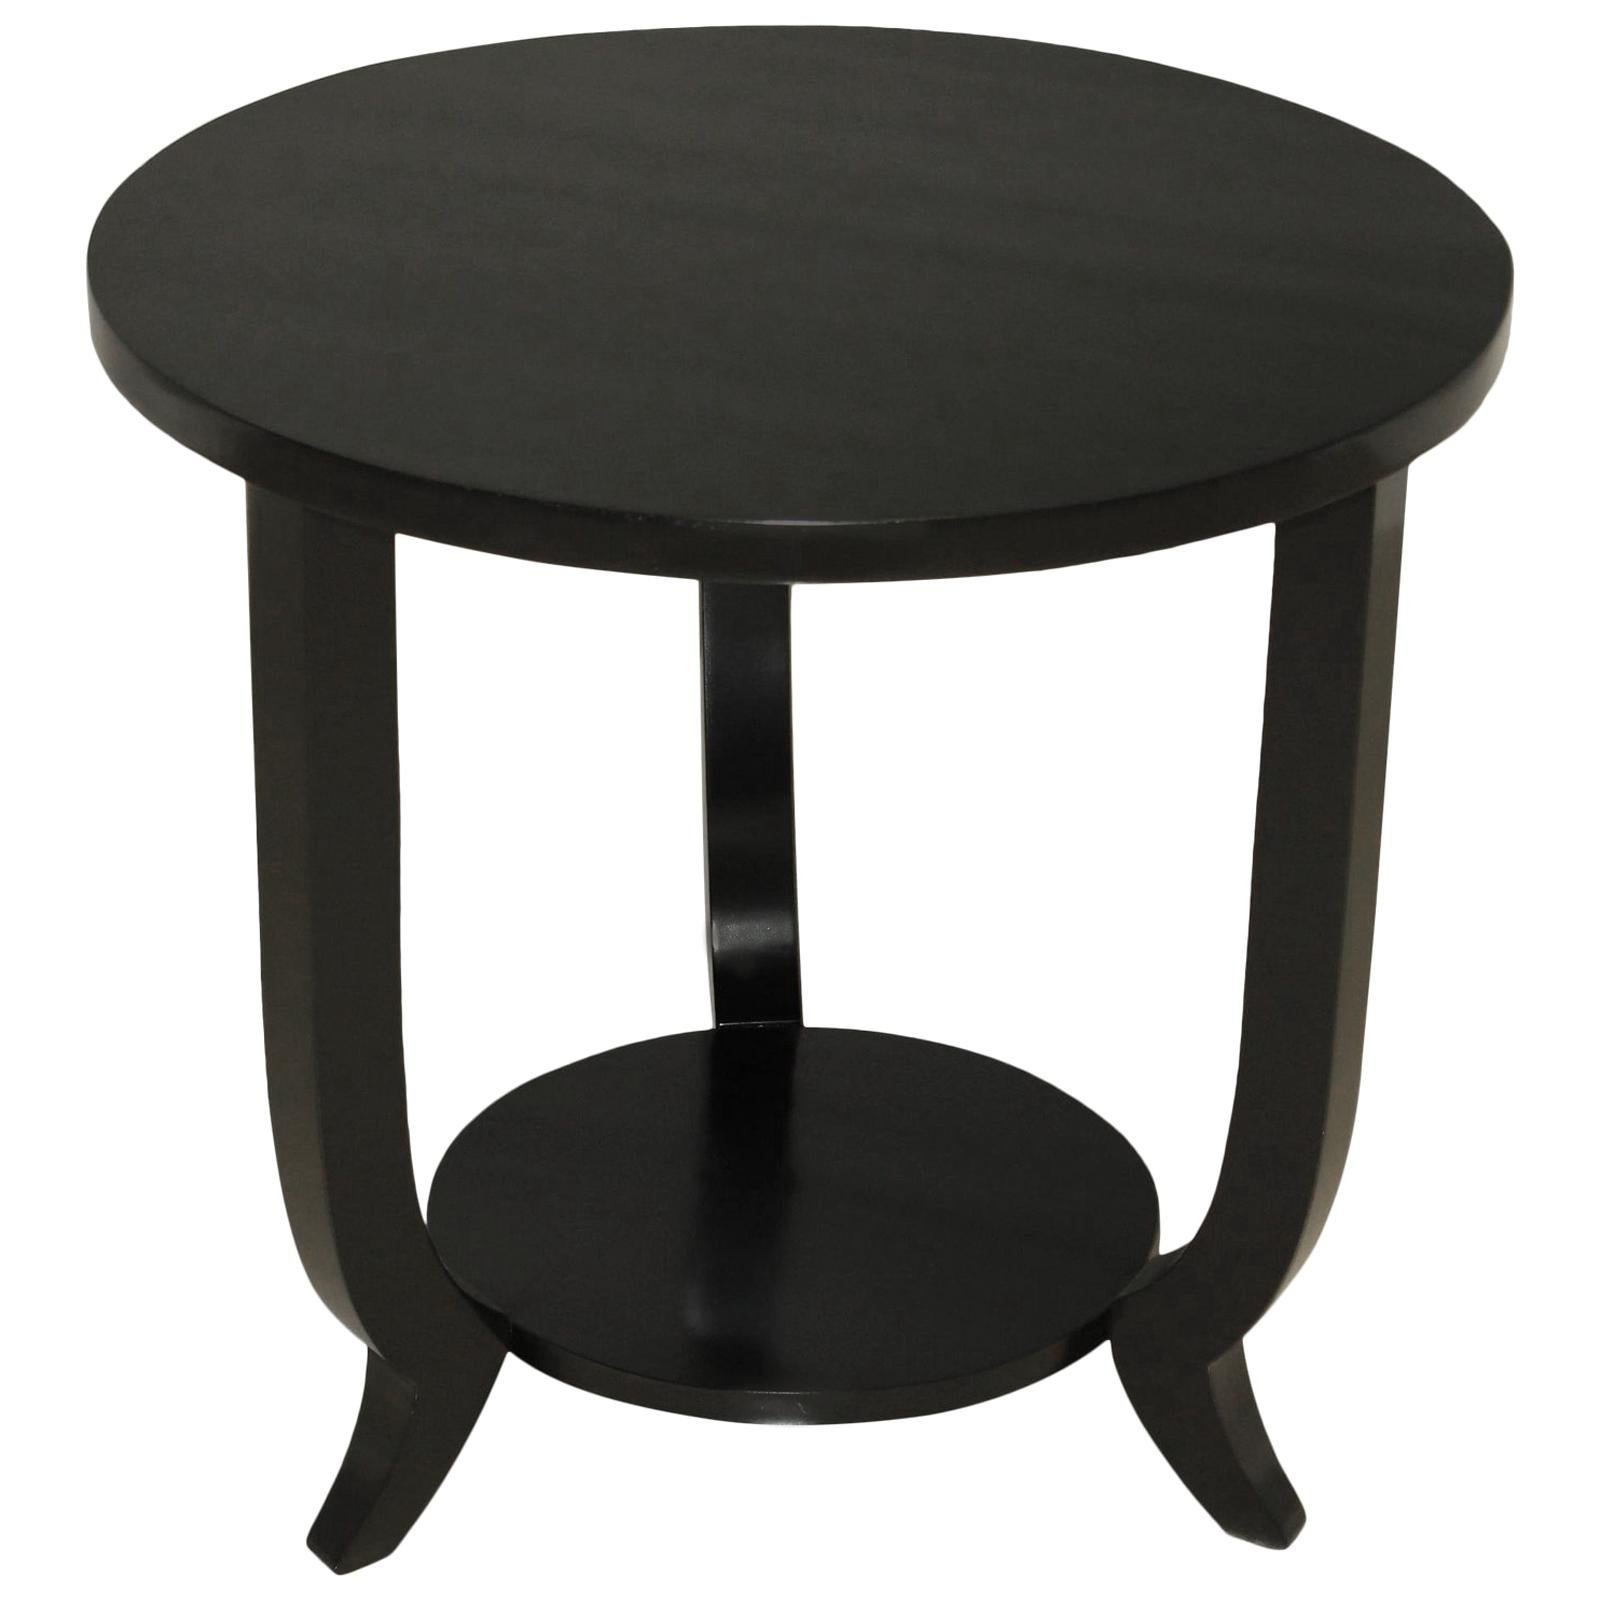 French Art Deco Black Ebonized Side Table or End Table, 1940s